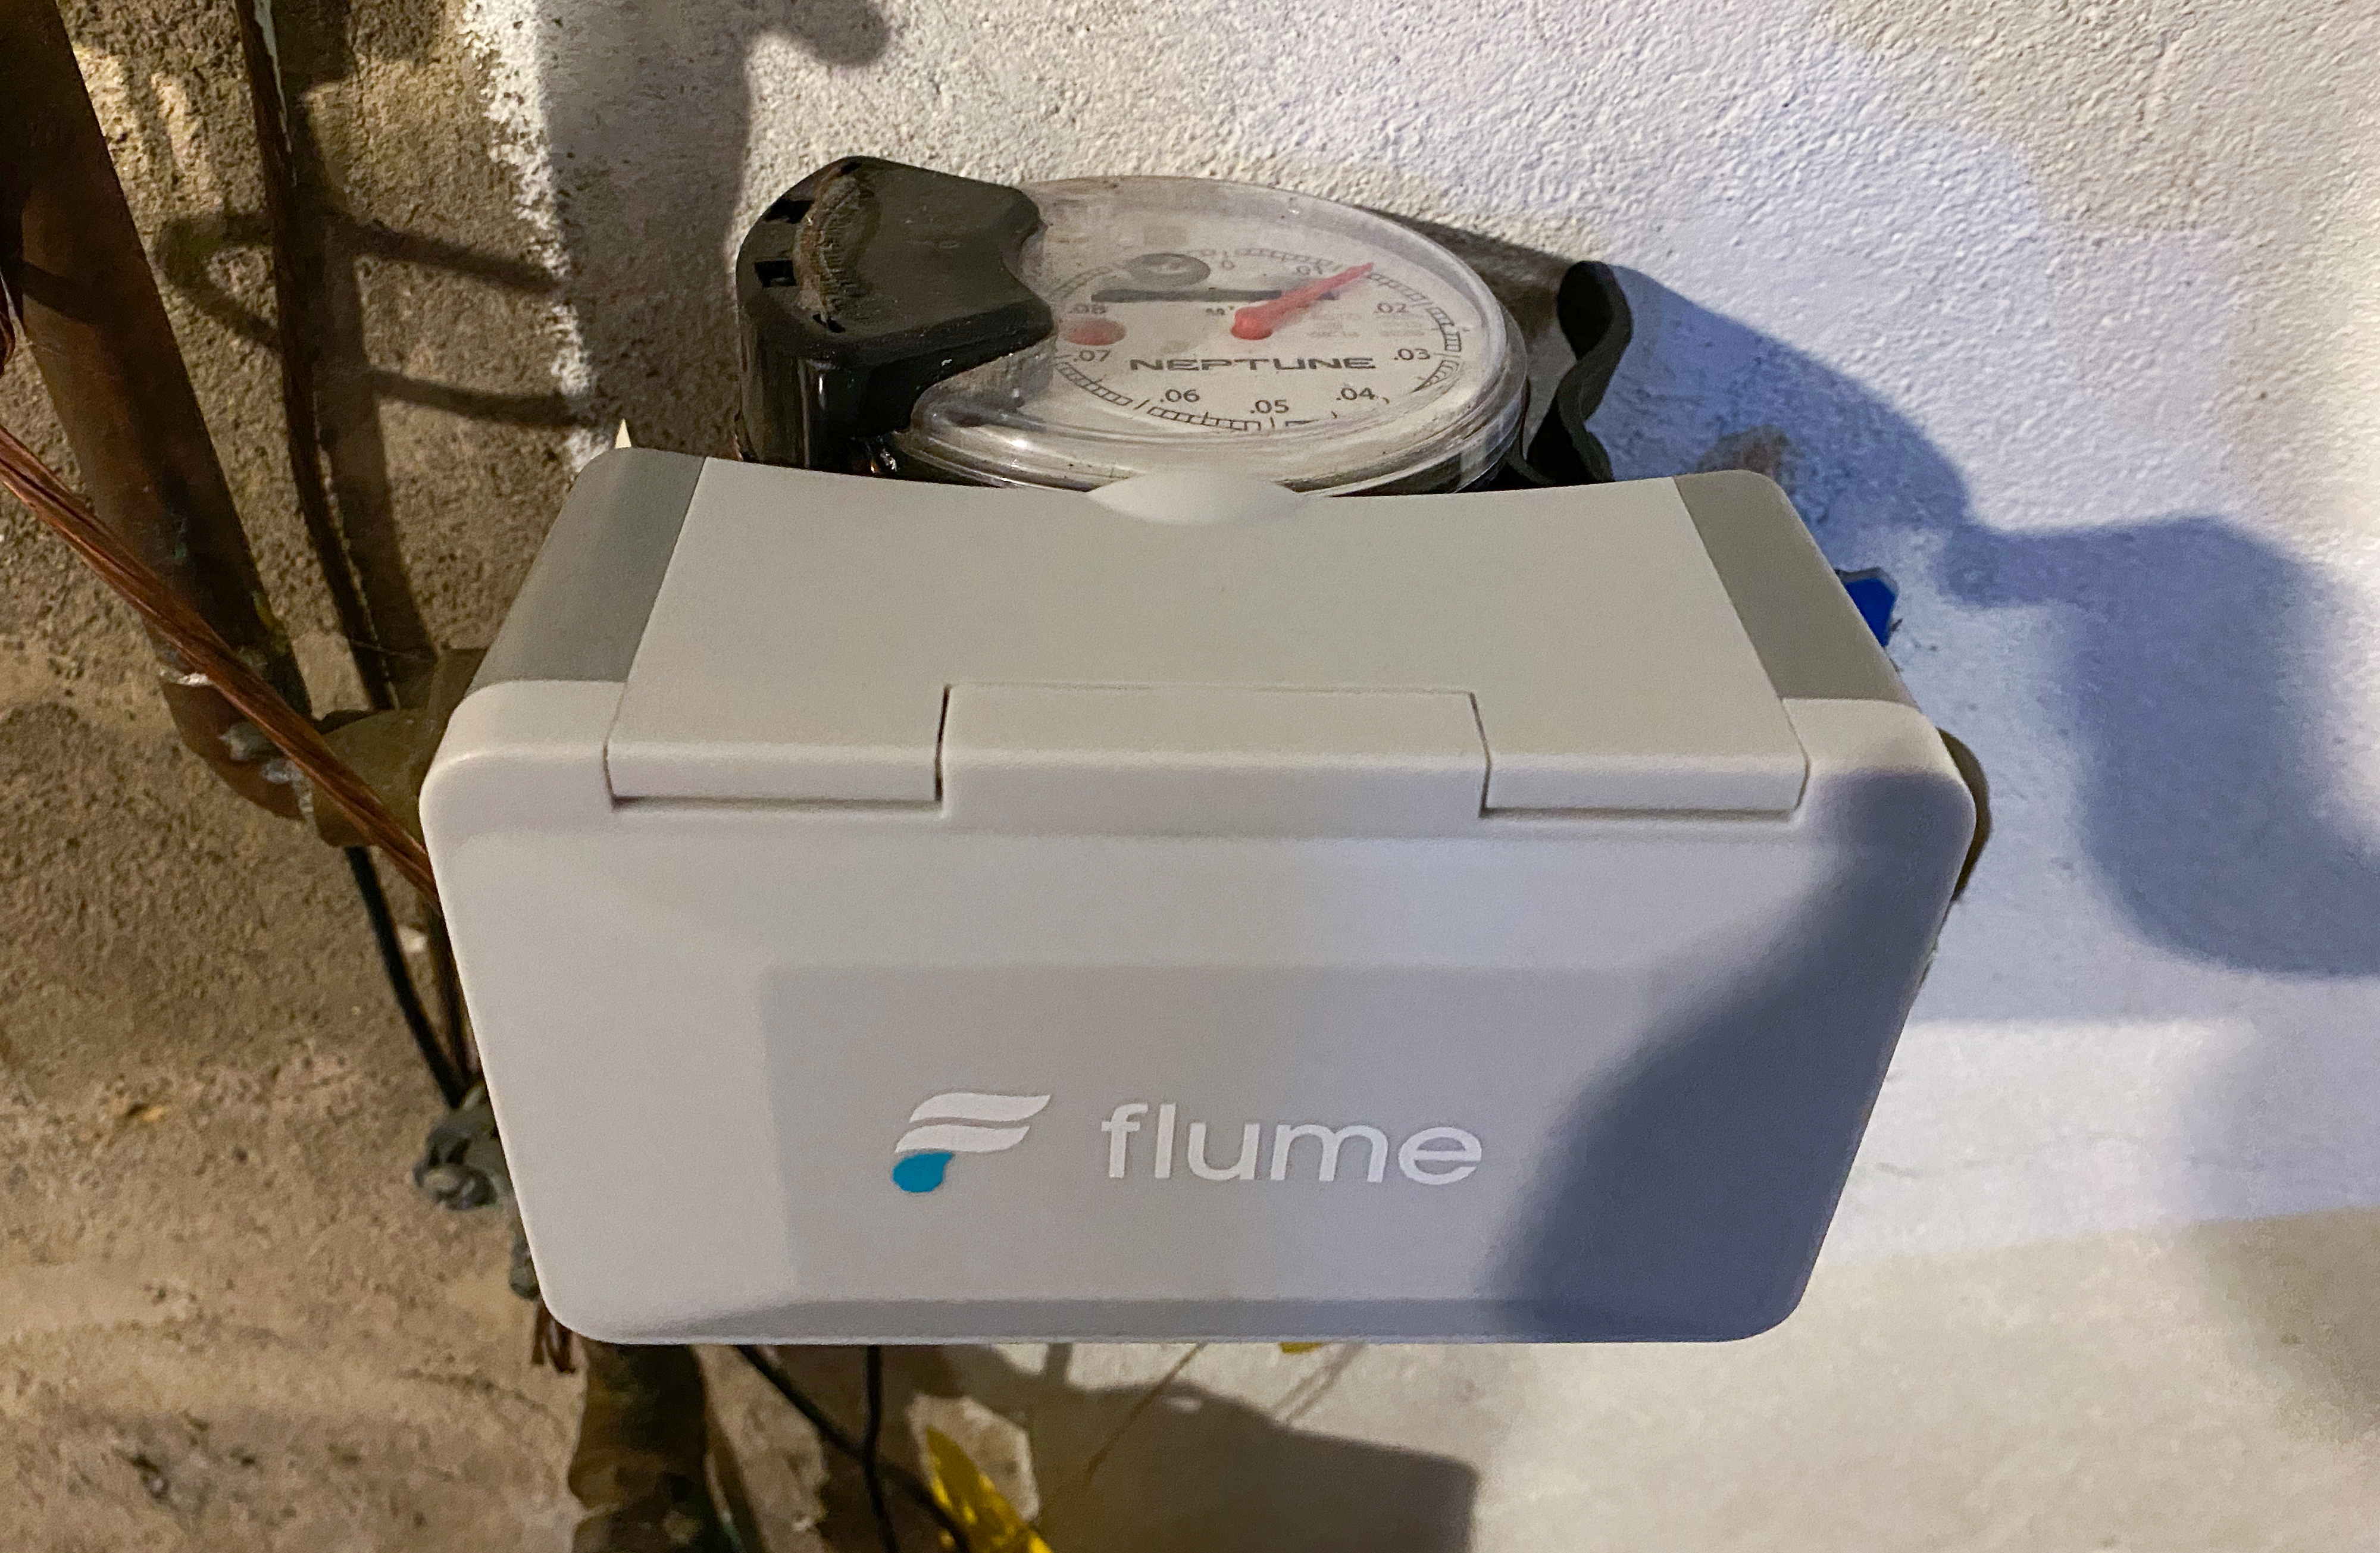 The Flume 2 Smart Home Water Monitor is a smart, easy-to-use and essential  smart home device | TechCrunch